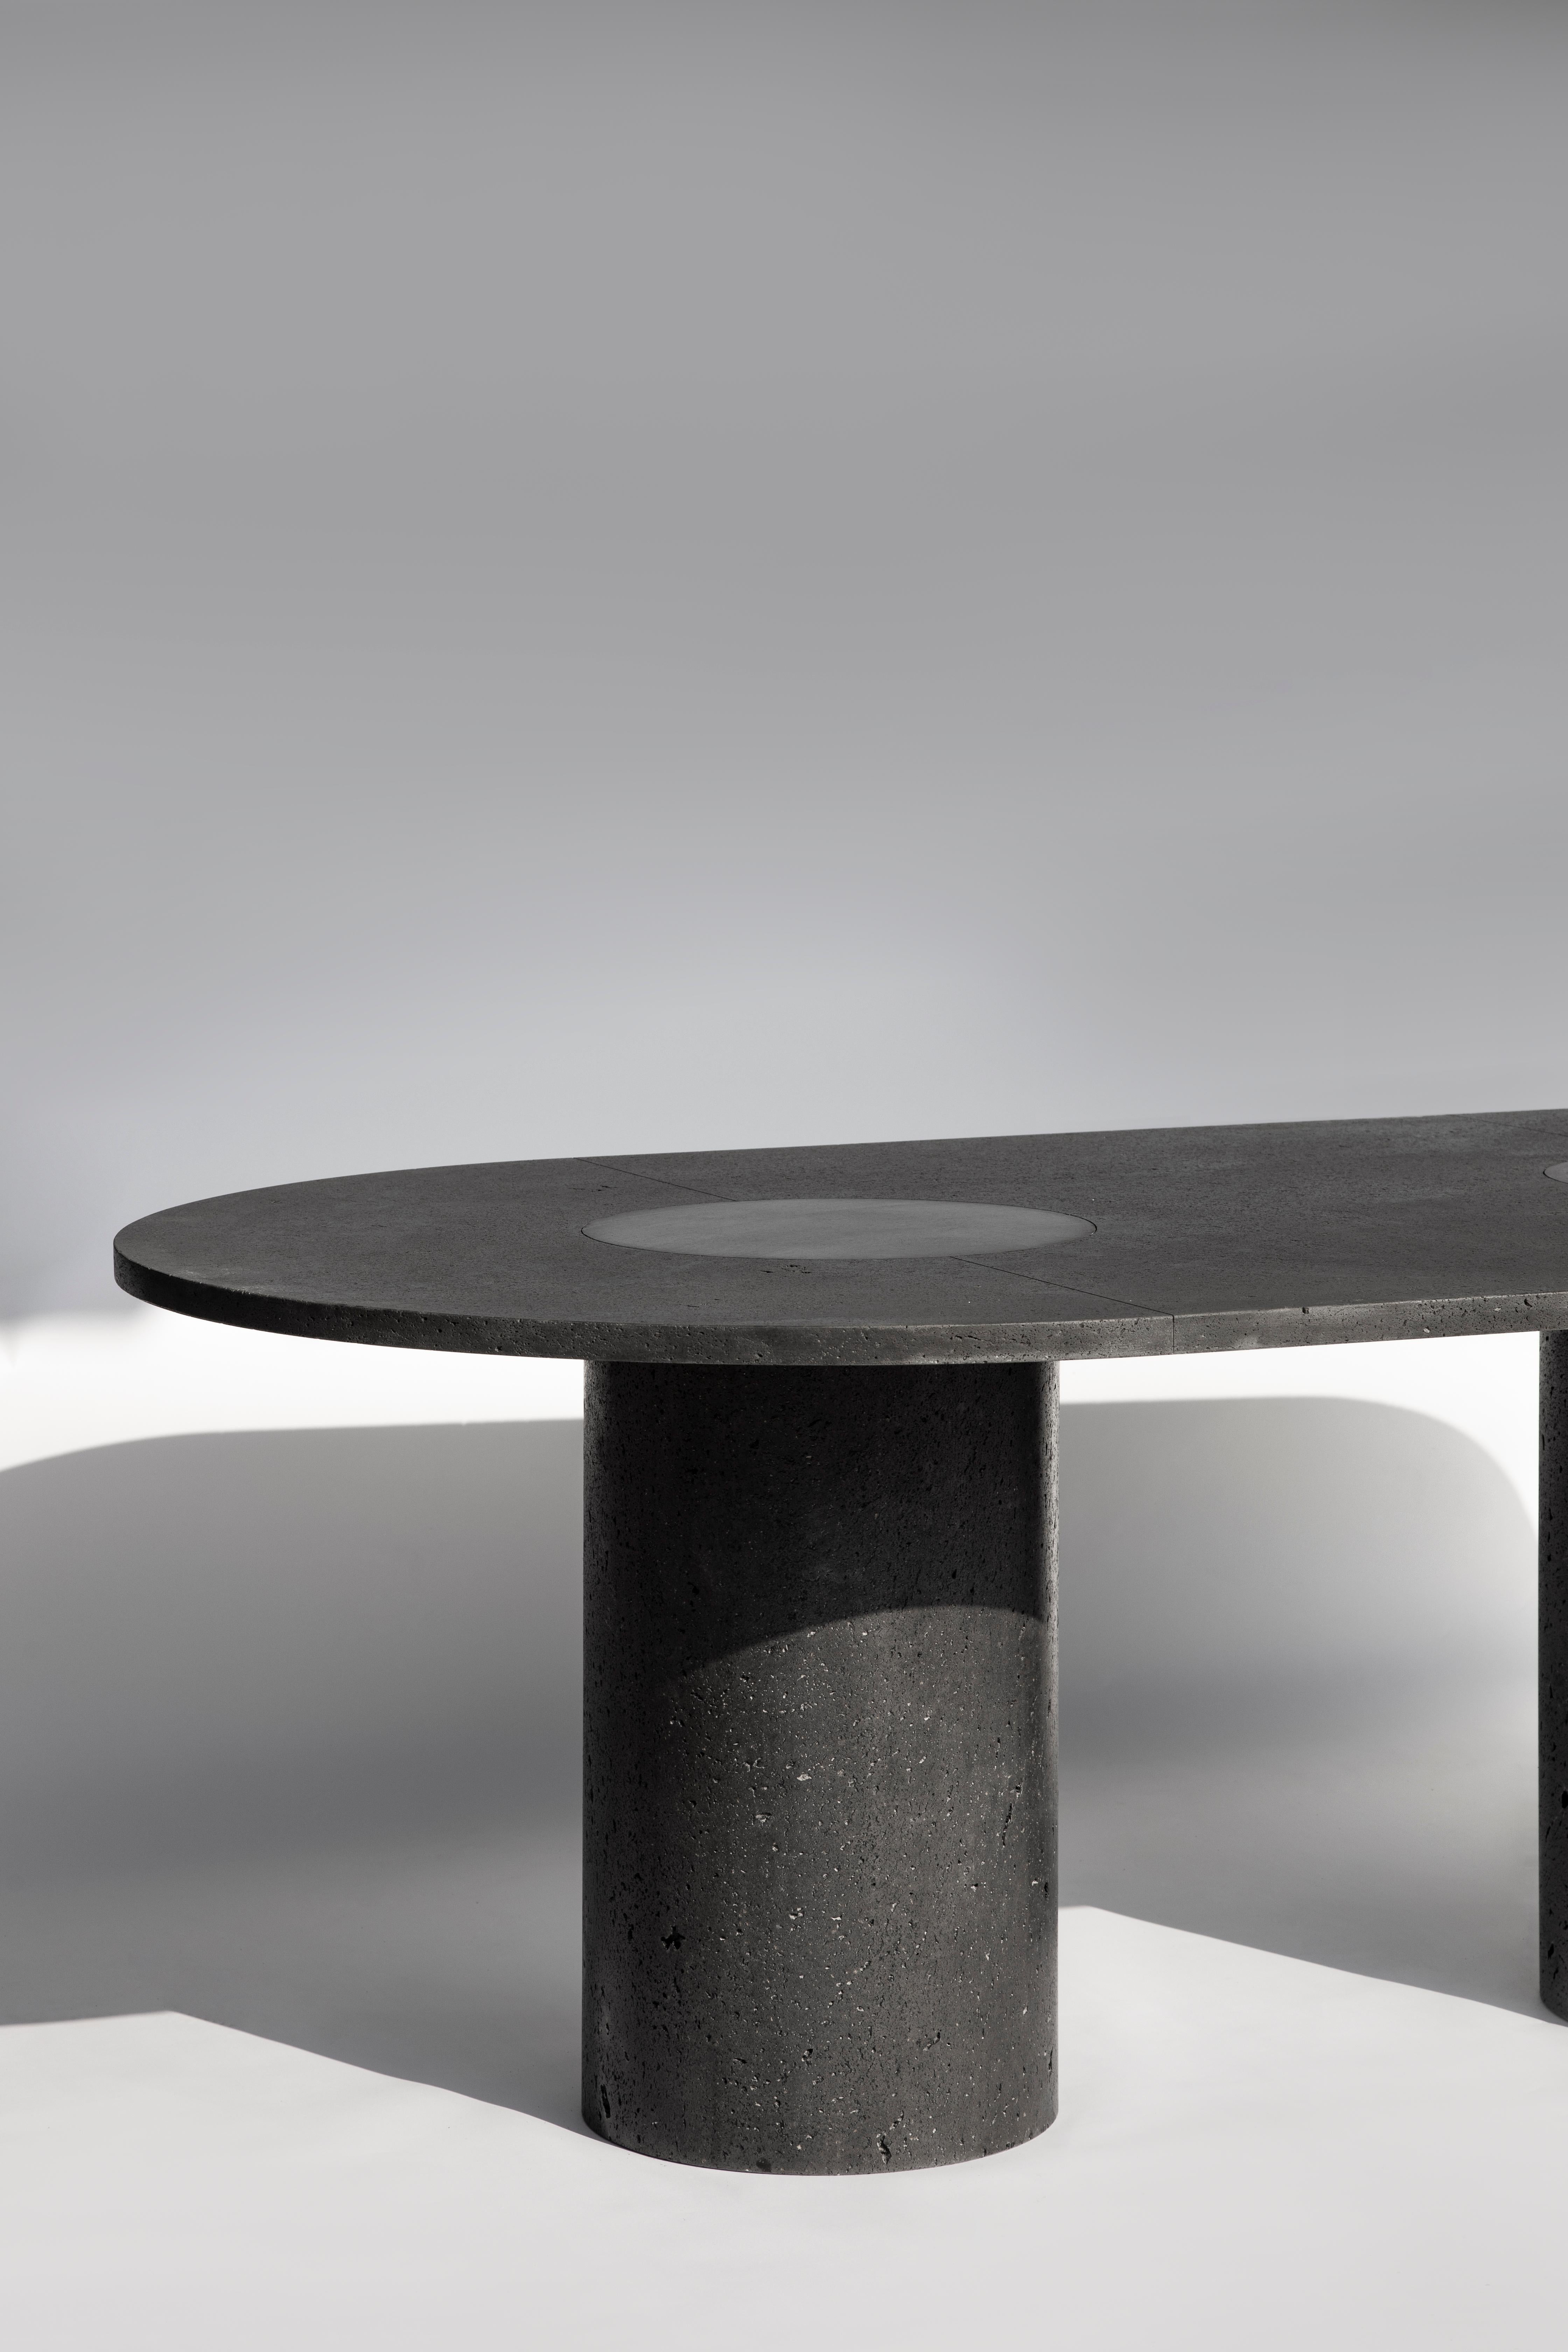 Our reverence towards the sumptuousness of volcanic stone has led us to honor this noble material with a table/sculpture whose rich, porous top sits on top of three cylindrical monoliths born from the whims of Mexico's volcanic terrain.
Etched lines